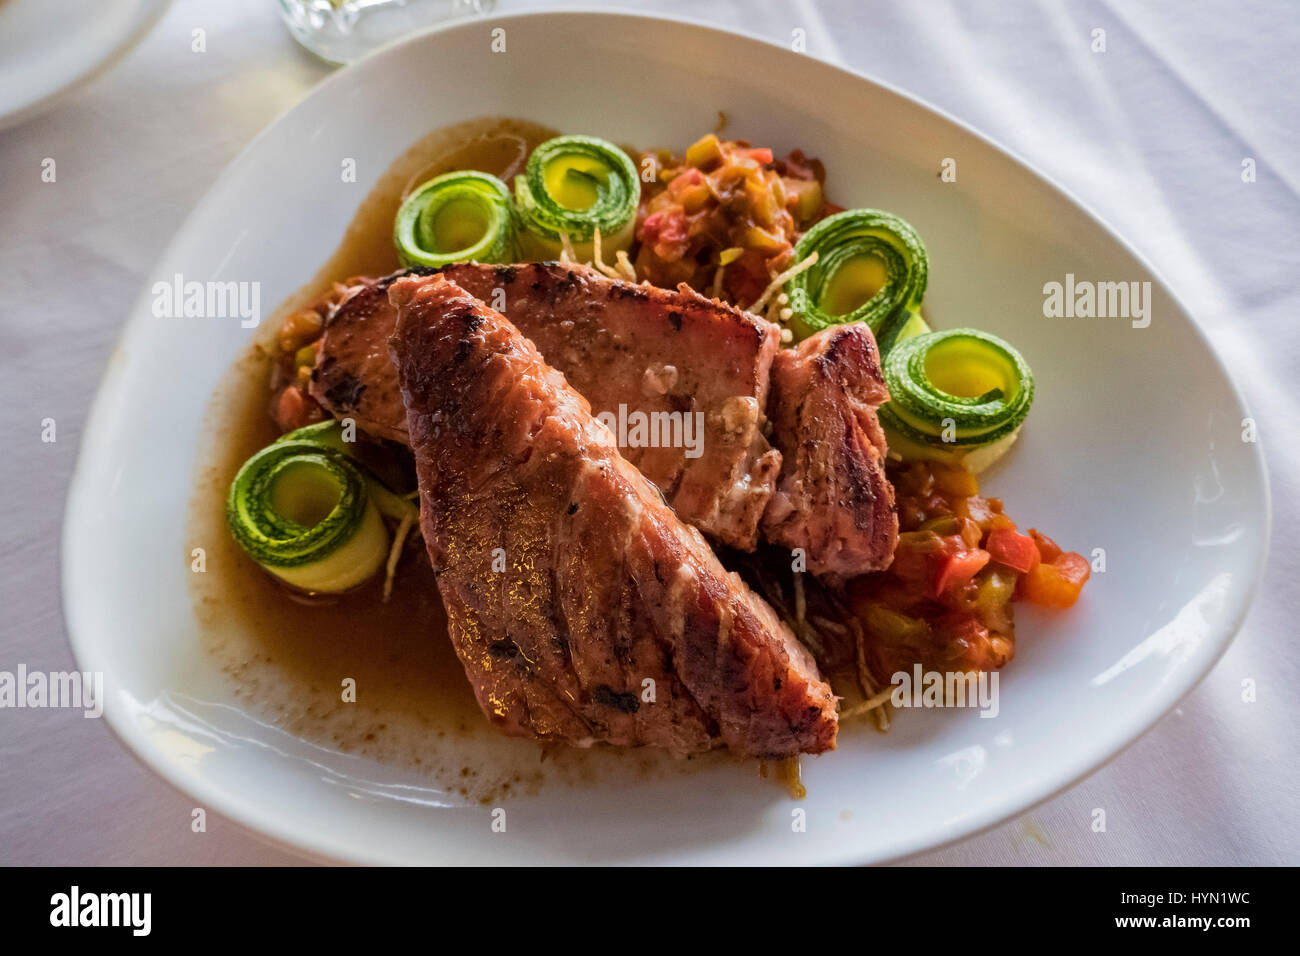 Delicious Mexico style fry fish fillet, ate at Mexico City Stock Photo